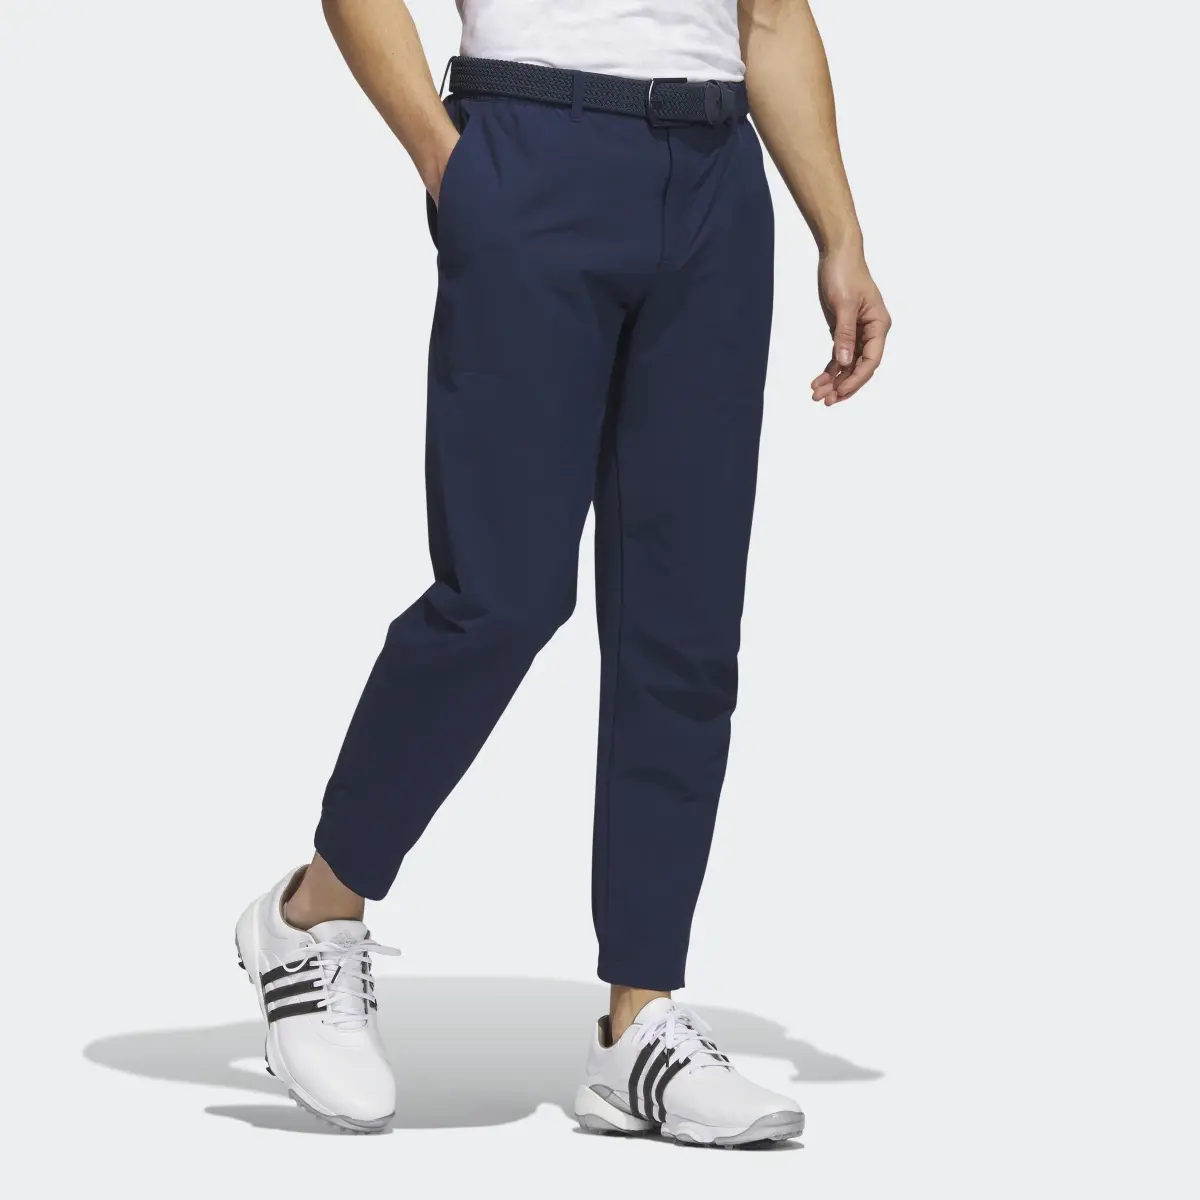 Adidas Go-To Commuter Trousers. 3